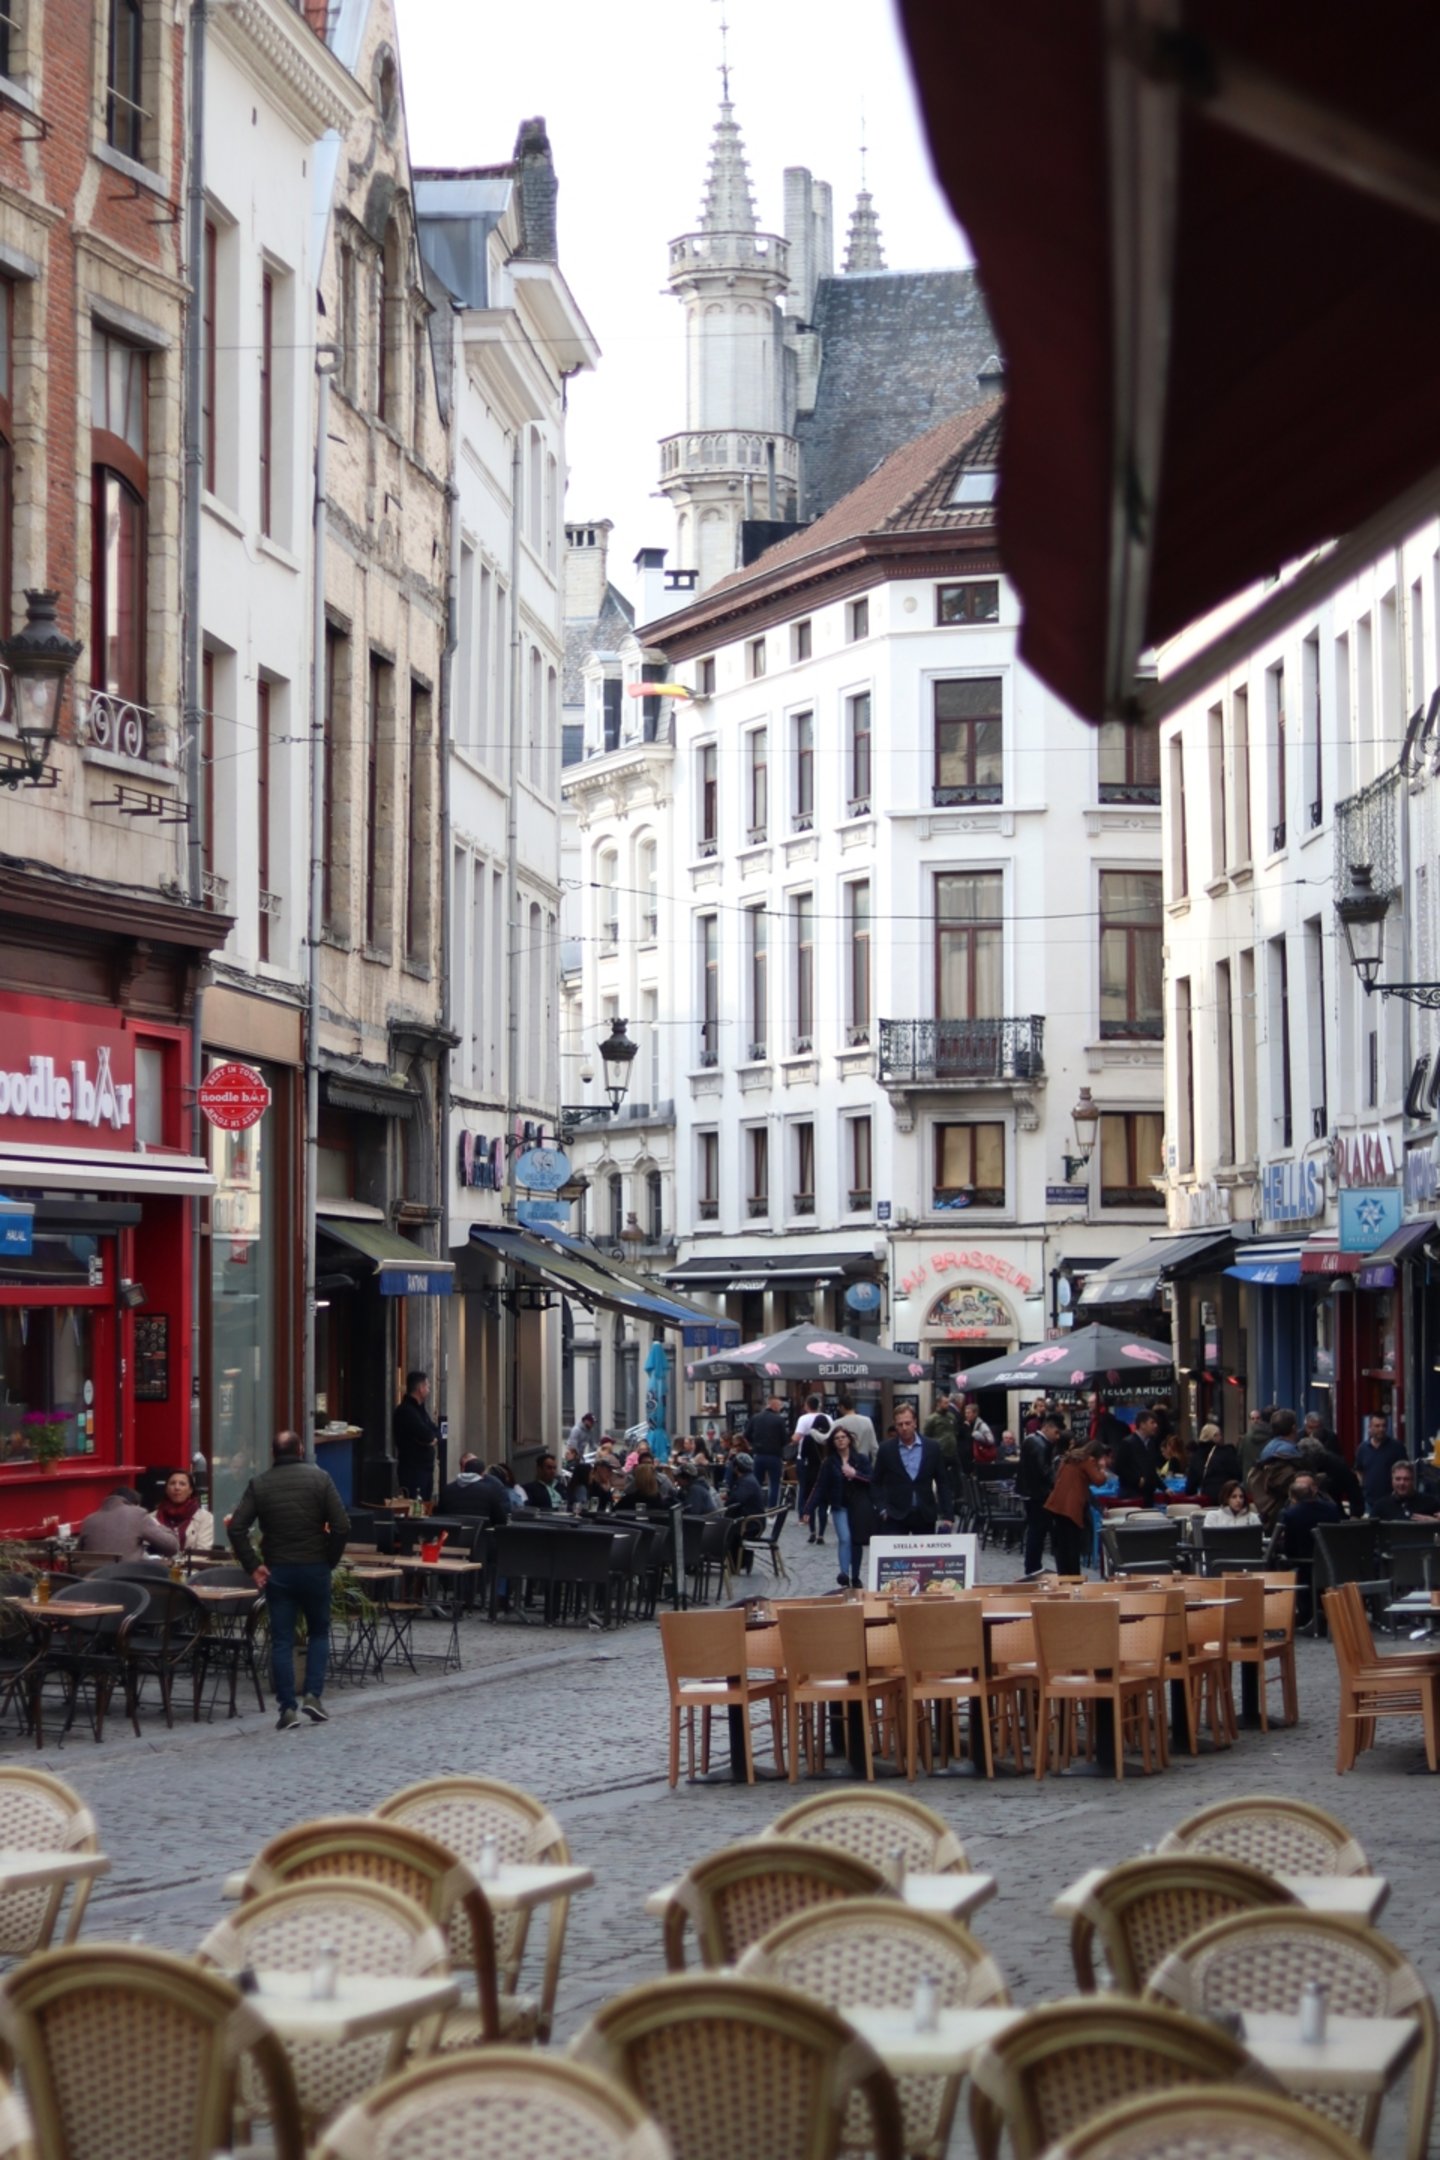 Street in Brussel, with many cafes and restaurants